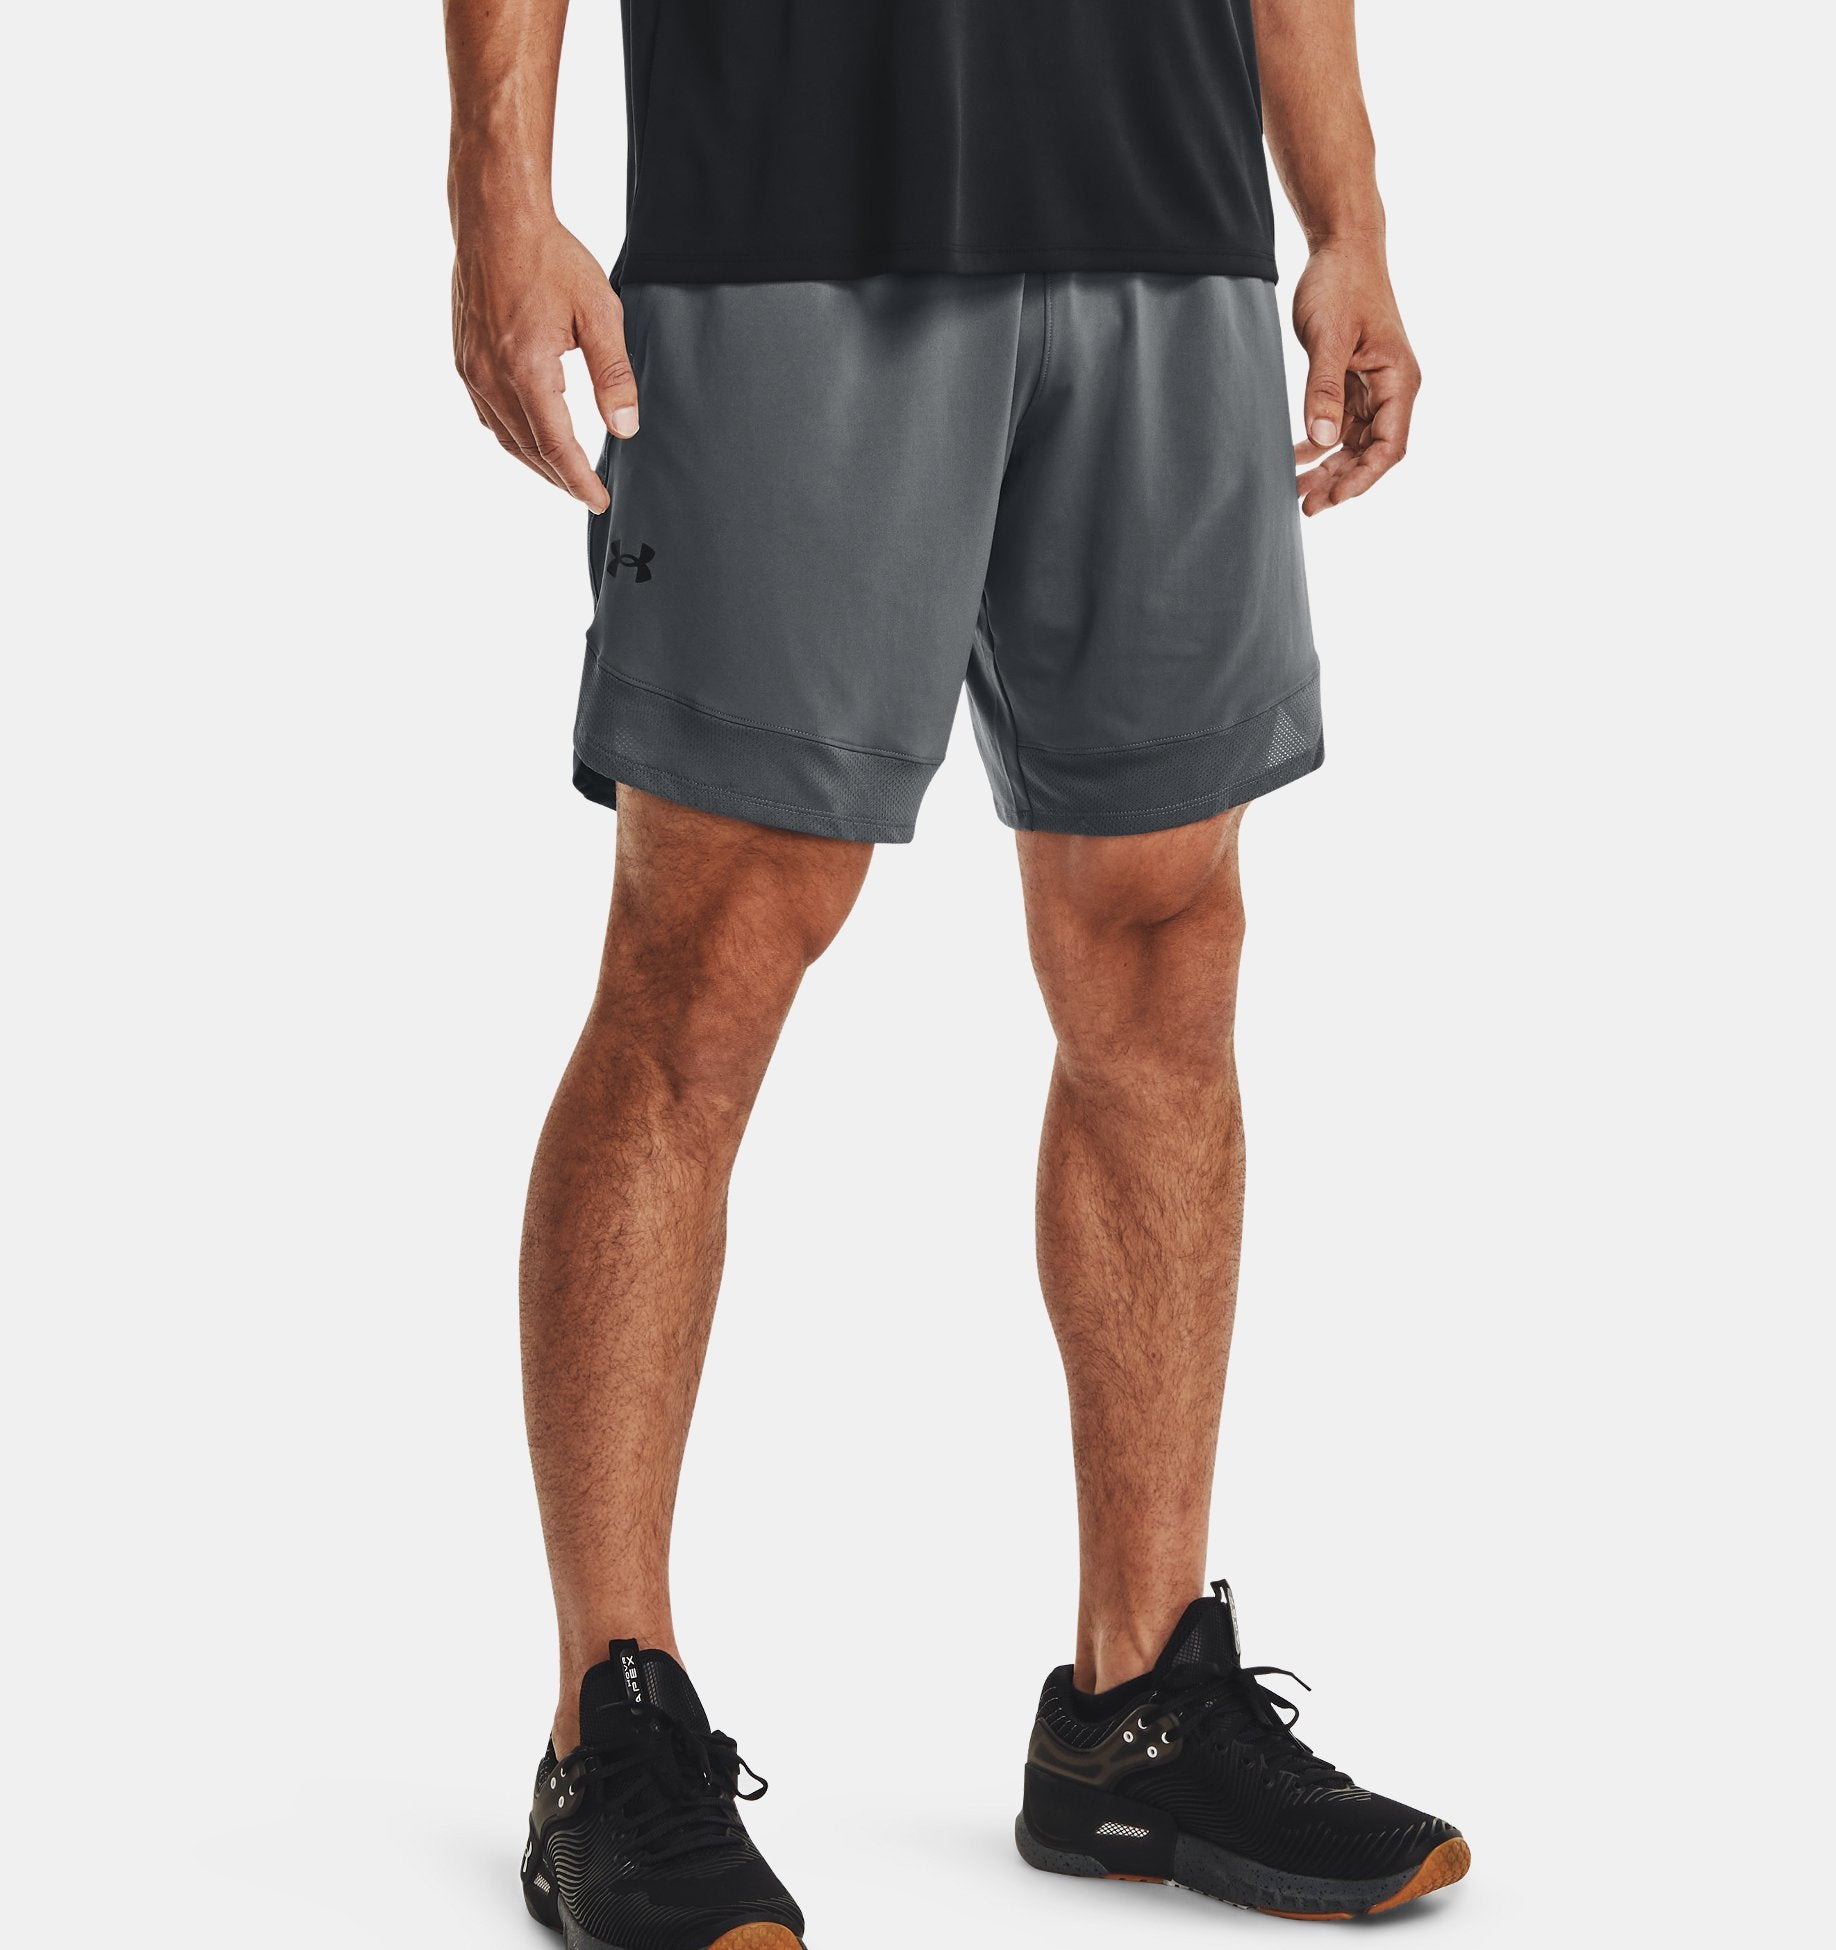 Under Armour Men's Train Stretch Shorts Apparel Under Armour S Pitch Gray/Black-012 